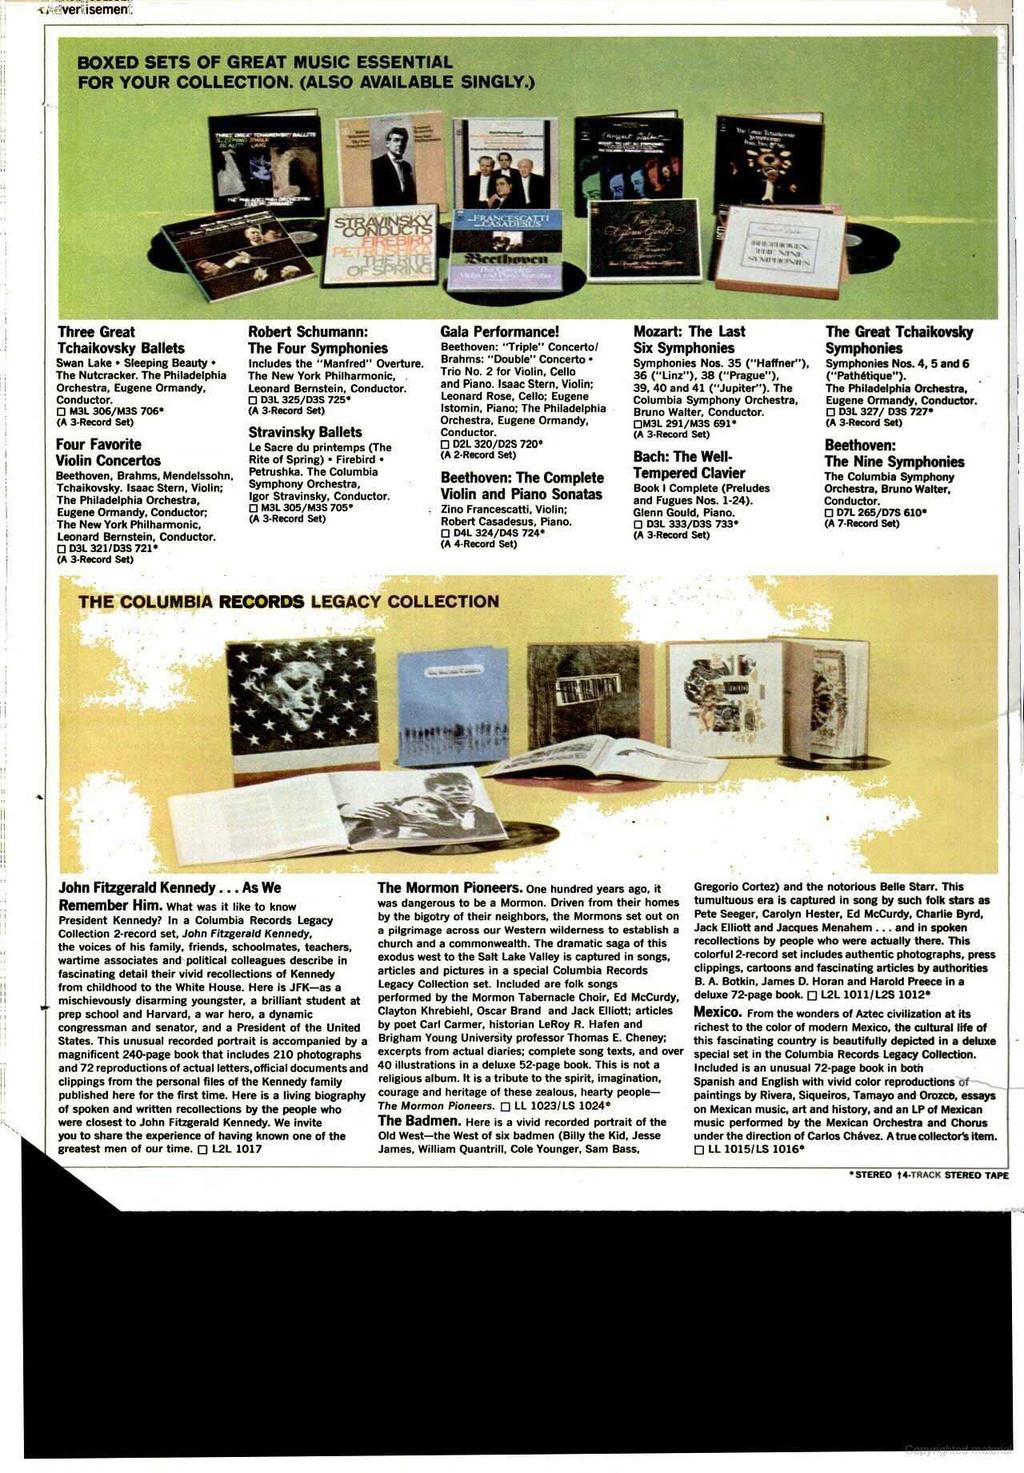 ver 'semen www.americanradiohistory.com BOXED SETS OF GREAT MUSIC ESSENTIAL FOR YOUR COLLECTION. (ALSO AVAILABLE SINGLY.) Three Great Tchaikovsky Ballets Swan Lake Sleeping Beauty The Nutcracker.